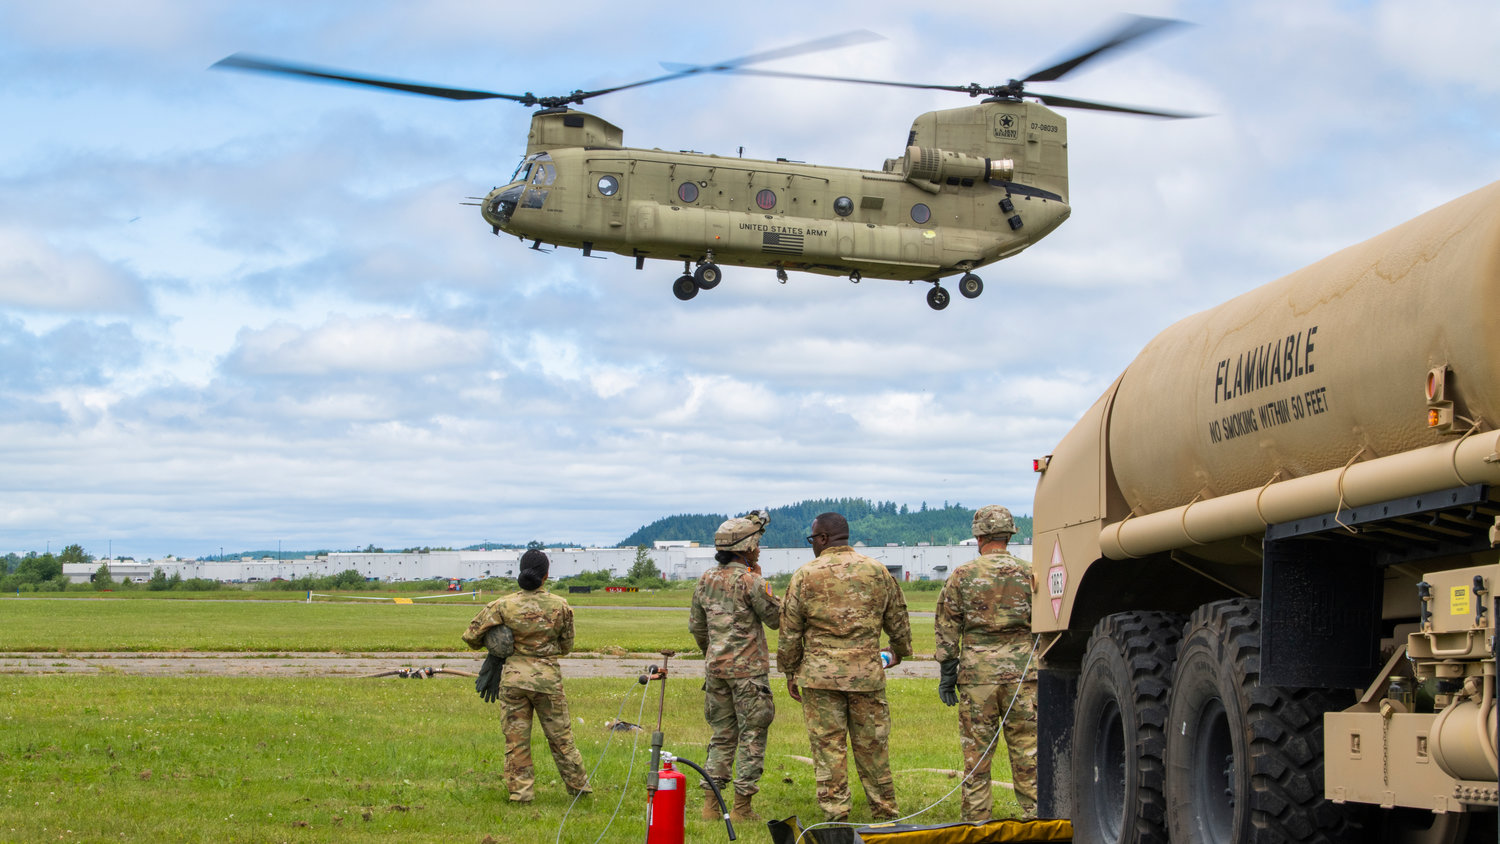 Members of the United States Army from Joint Base Lewis-McChord watch as a Chinook helicopter prepares to land at the Chehalis-Centralia Airport during a military training exercise on Wednesday. Look for a full story and additional photographs from the training in Saturday’s edition of The Chronicle.